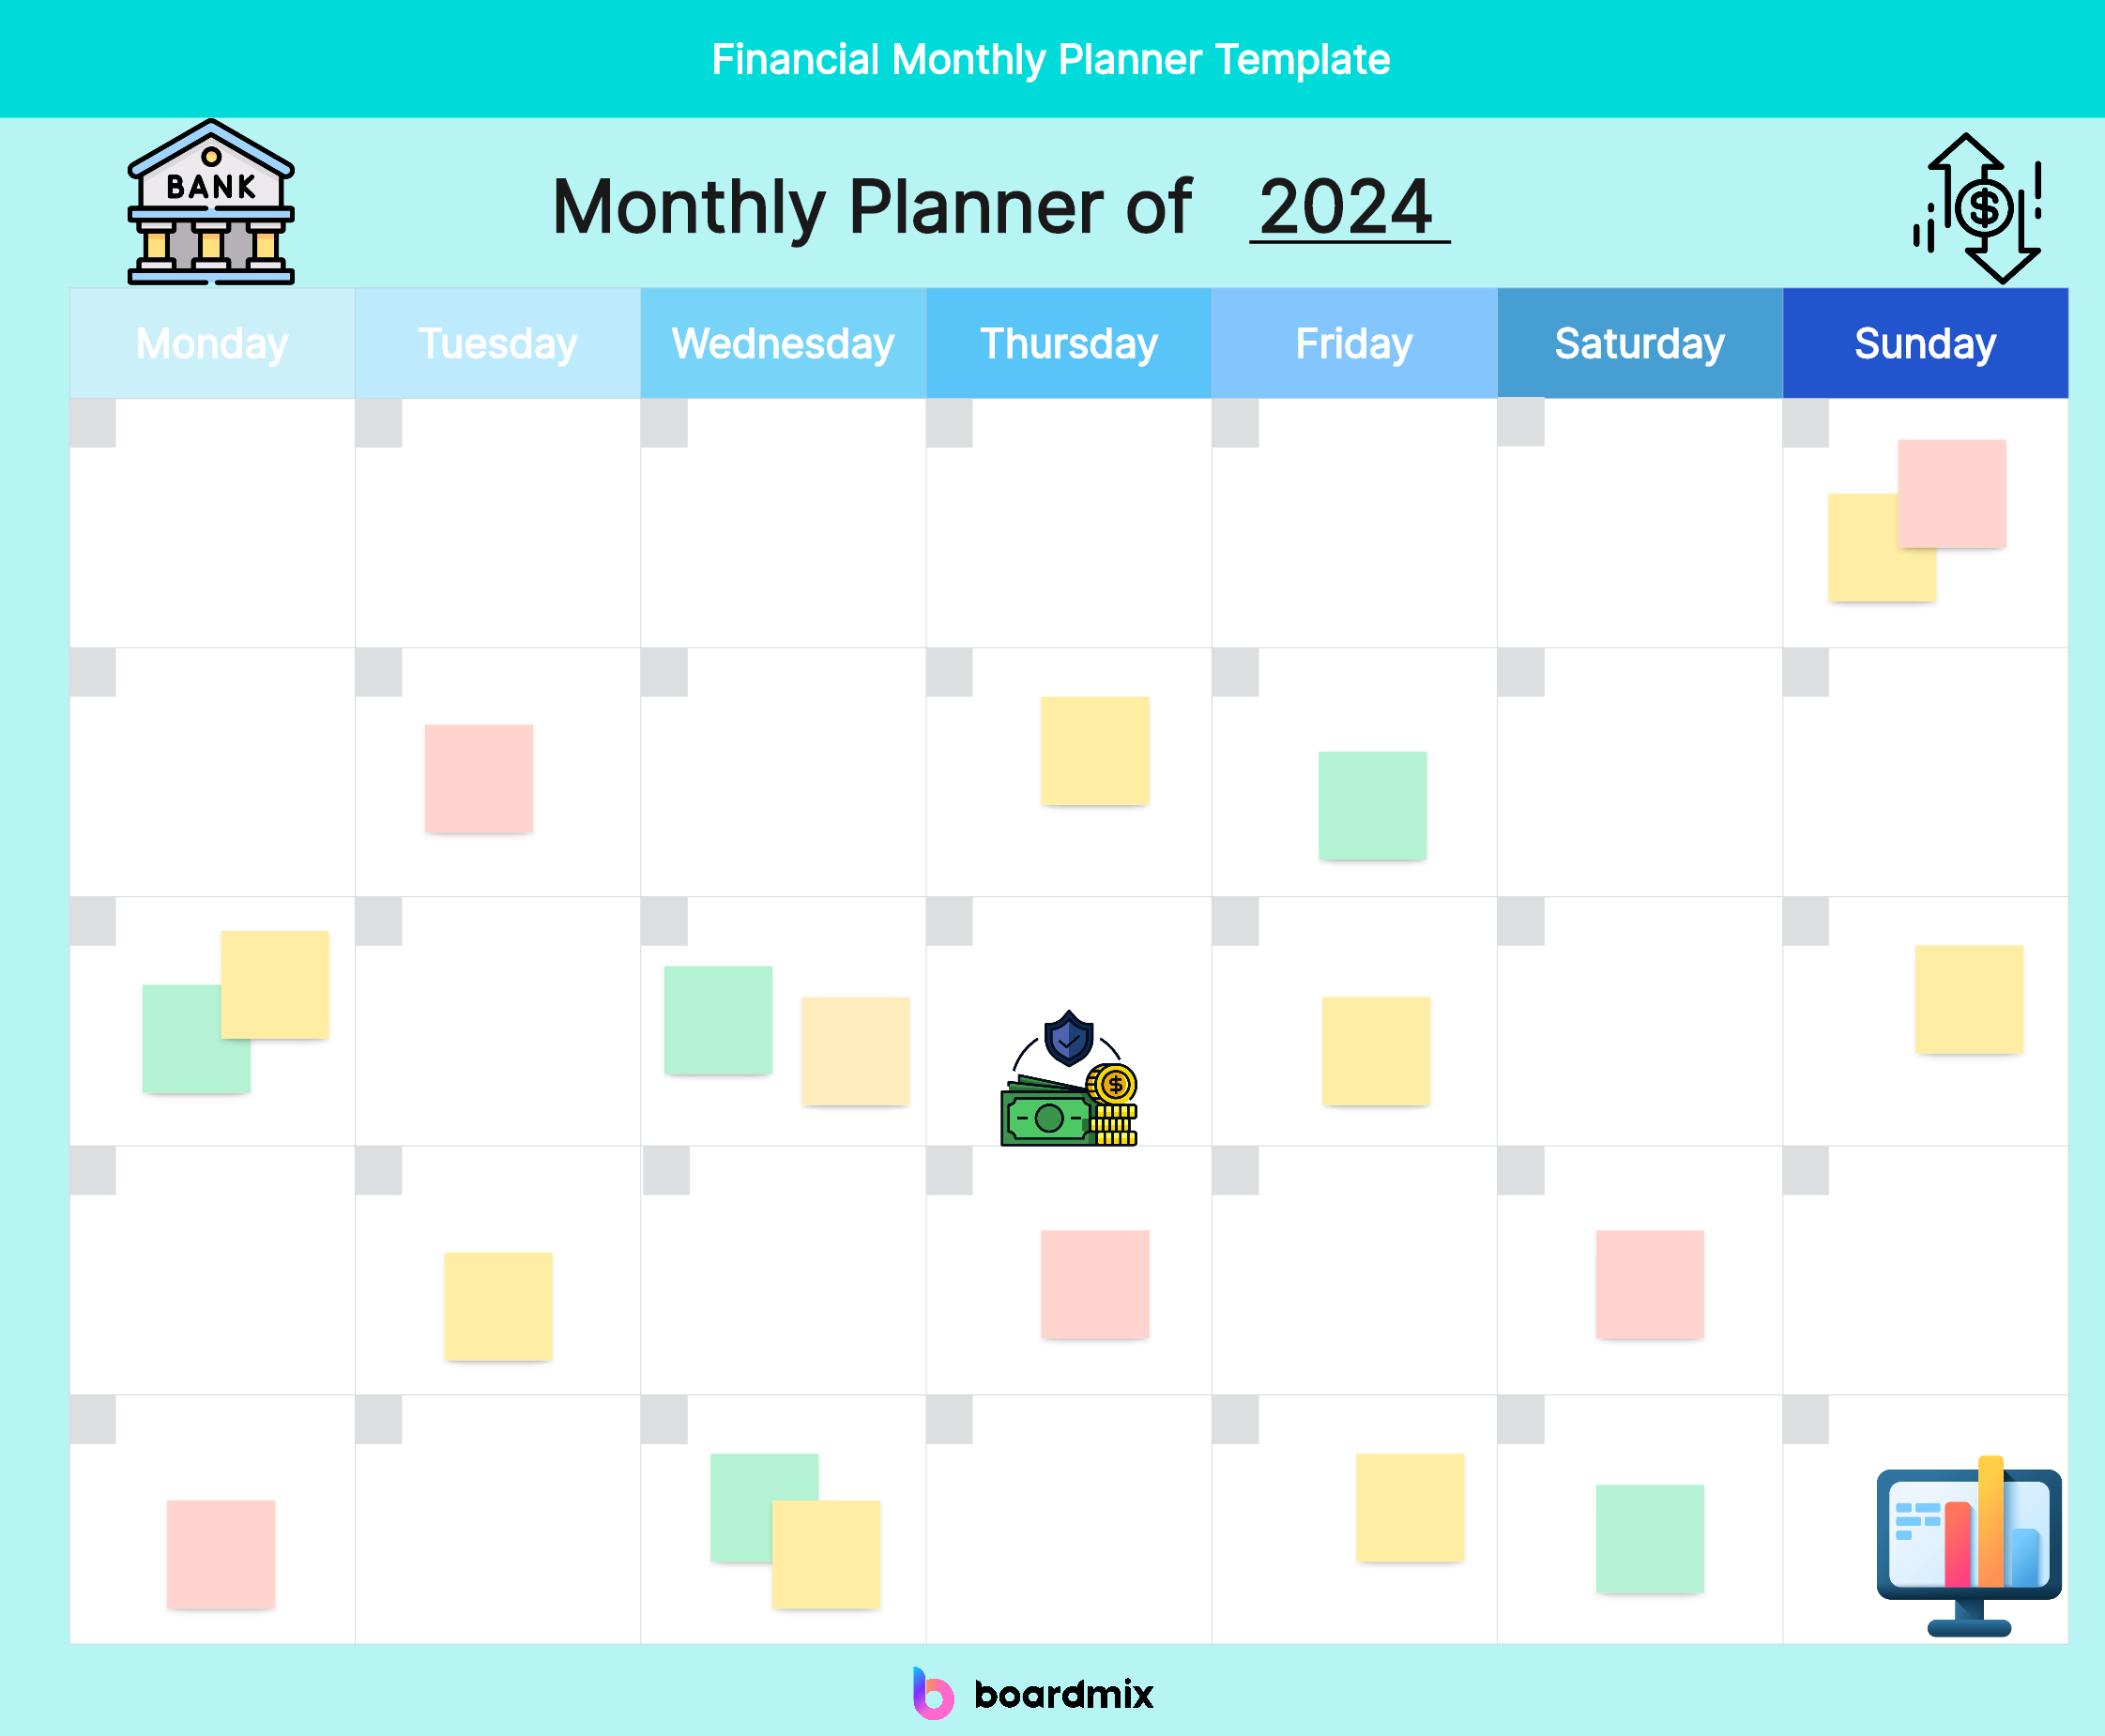 financial-monthly-planner-template.png